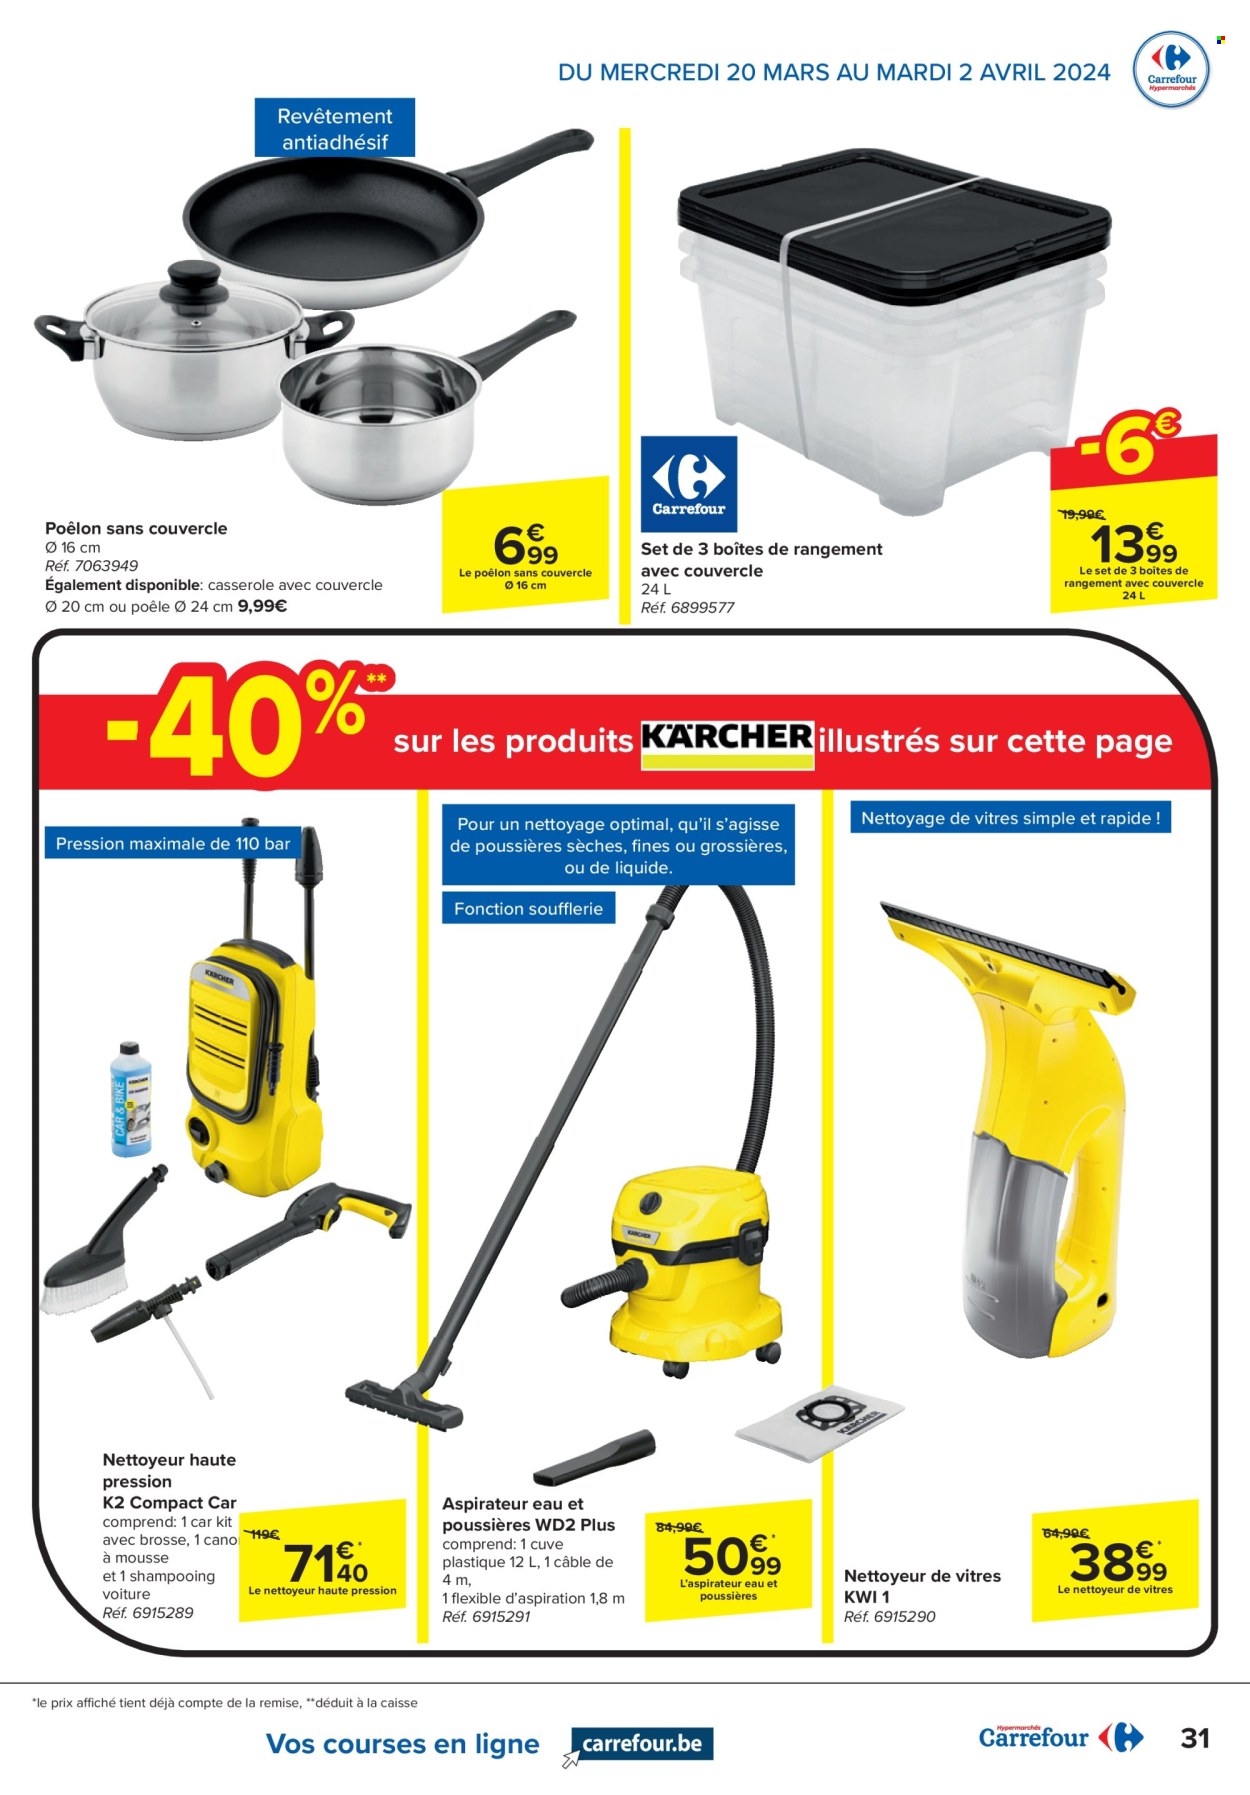 Catalogue Carrefour hypermarkt - 20.3.2024 - 2.4.2024. Page 31.